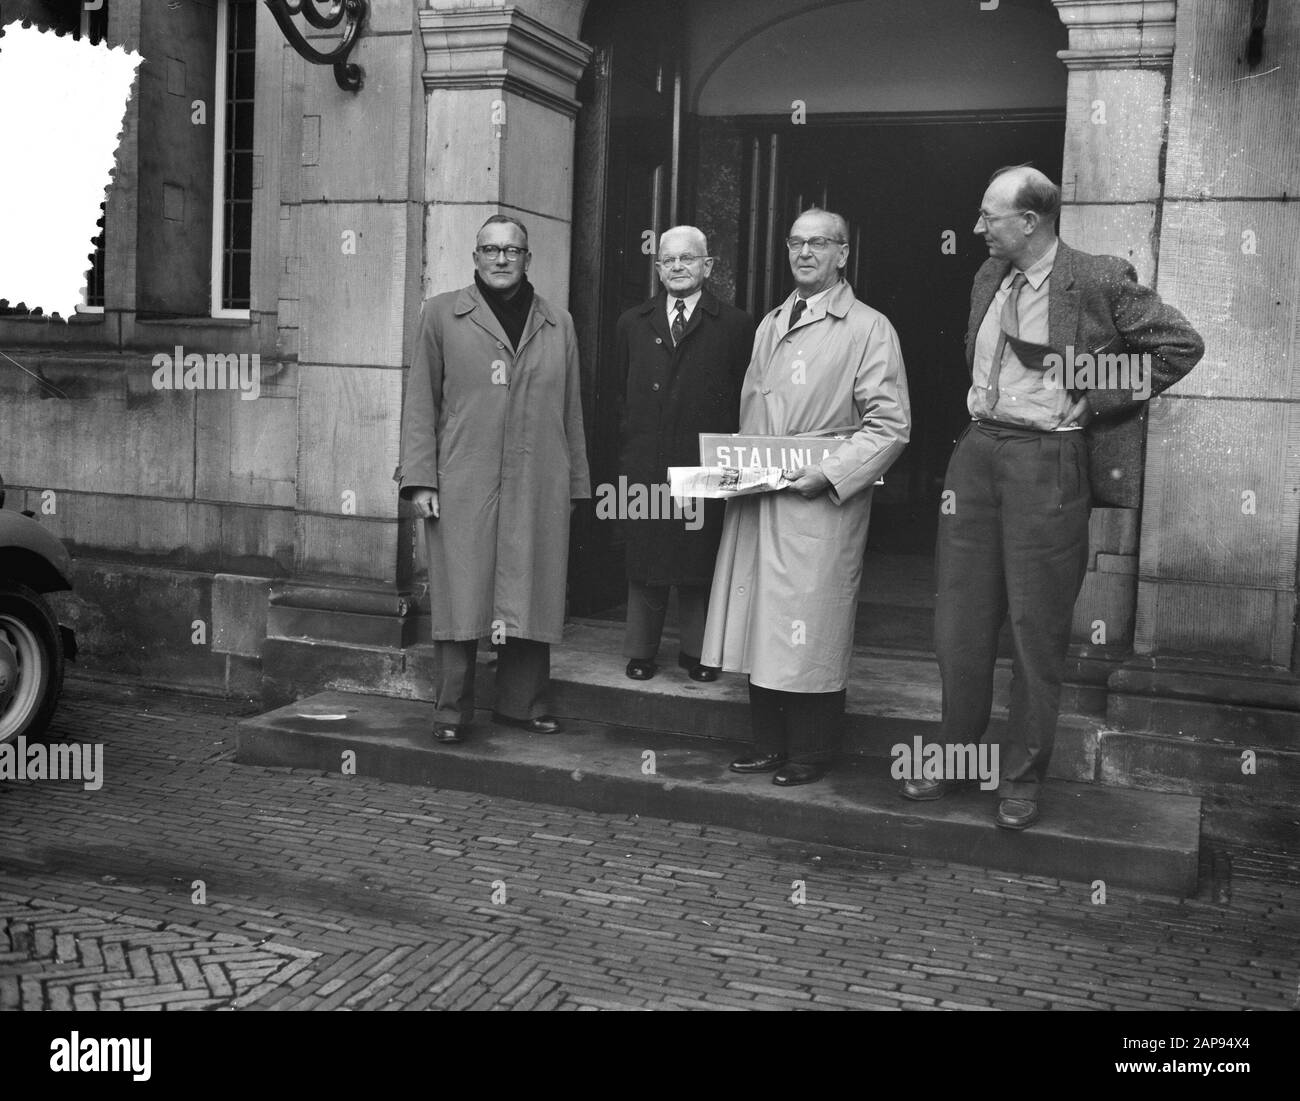 Amsterdam Stalinlaan becomes 4 Novemberlaan. Promoters with street sign for the town hall Date: 4 November 1956 Location: Amsterdam, Noord-Holland Keywords: offers, mayors Personal name: Stalinlaan Stock Photo